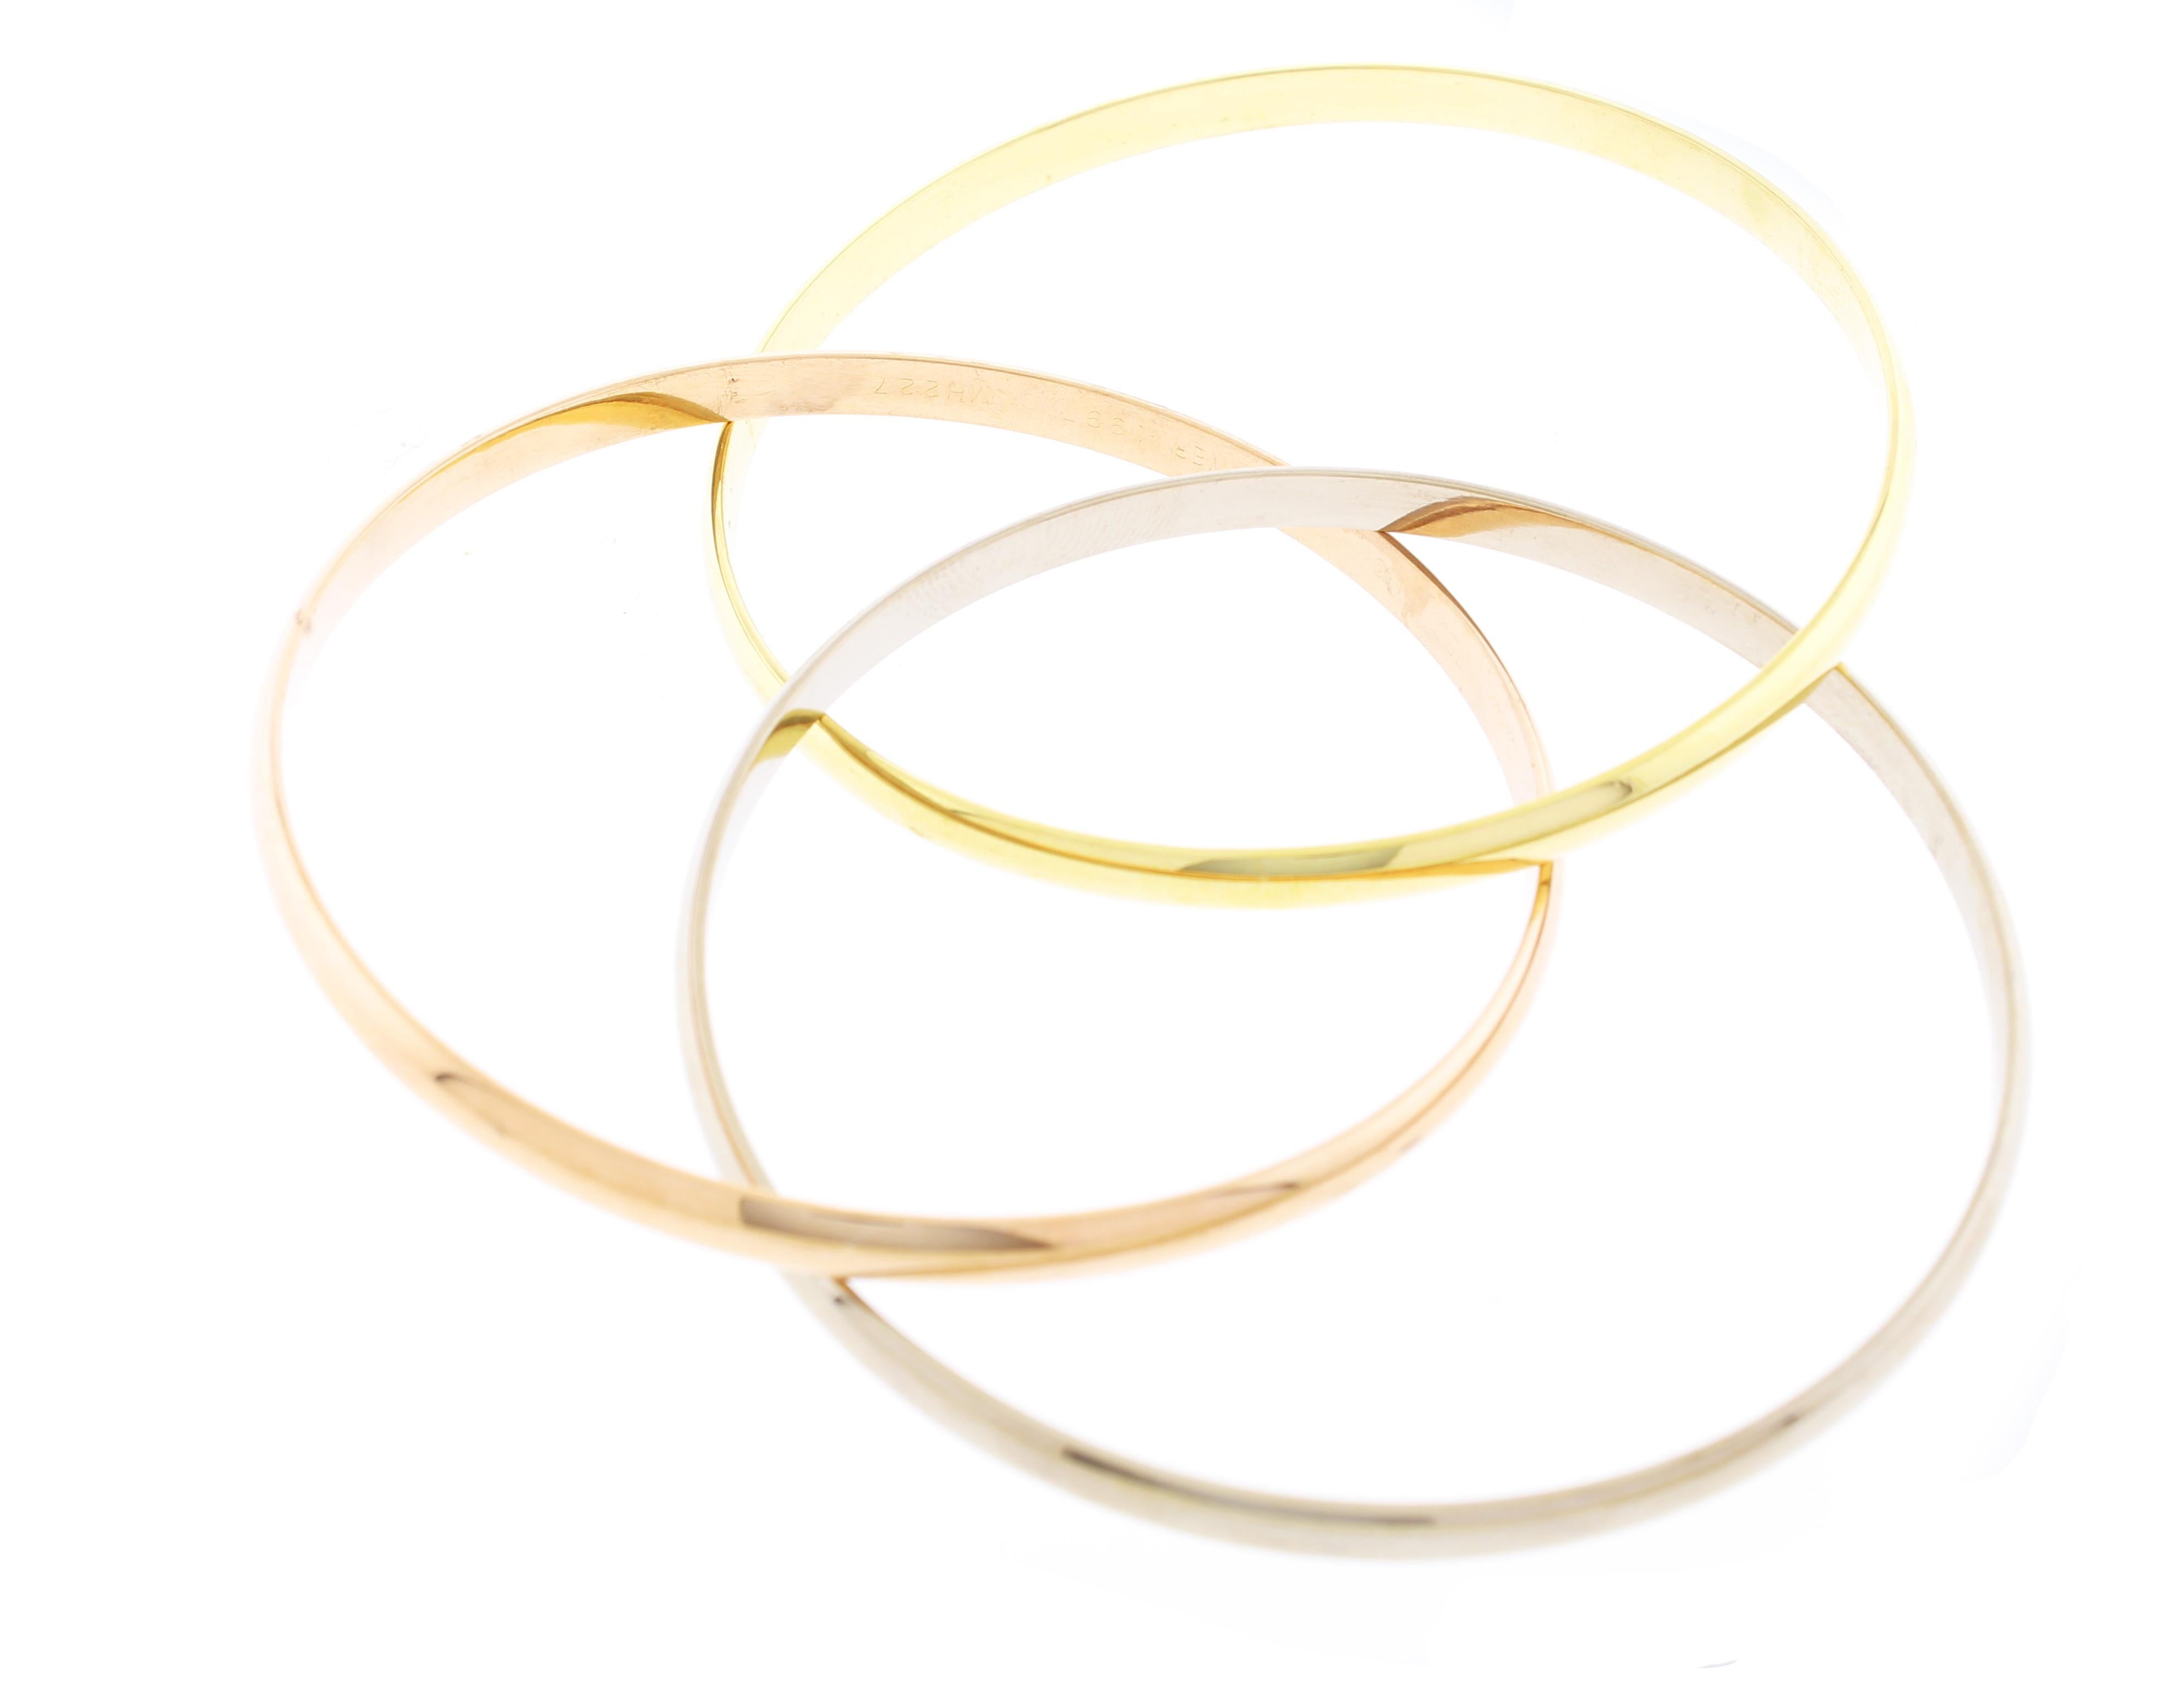 From Cartier, this bracelet is from the trinity collection.   Three interlocking bands, each made from a different color of gold: yellow gold representing fidelity, rose gold representing love, and white gold representing friendship.
♦ Designer: